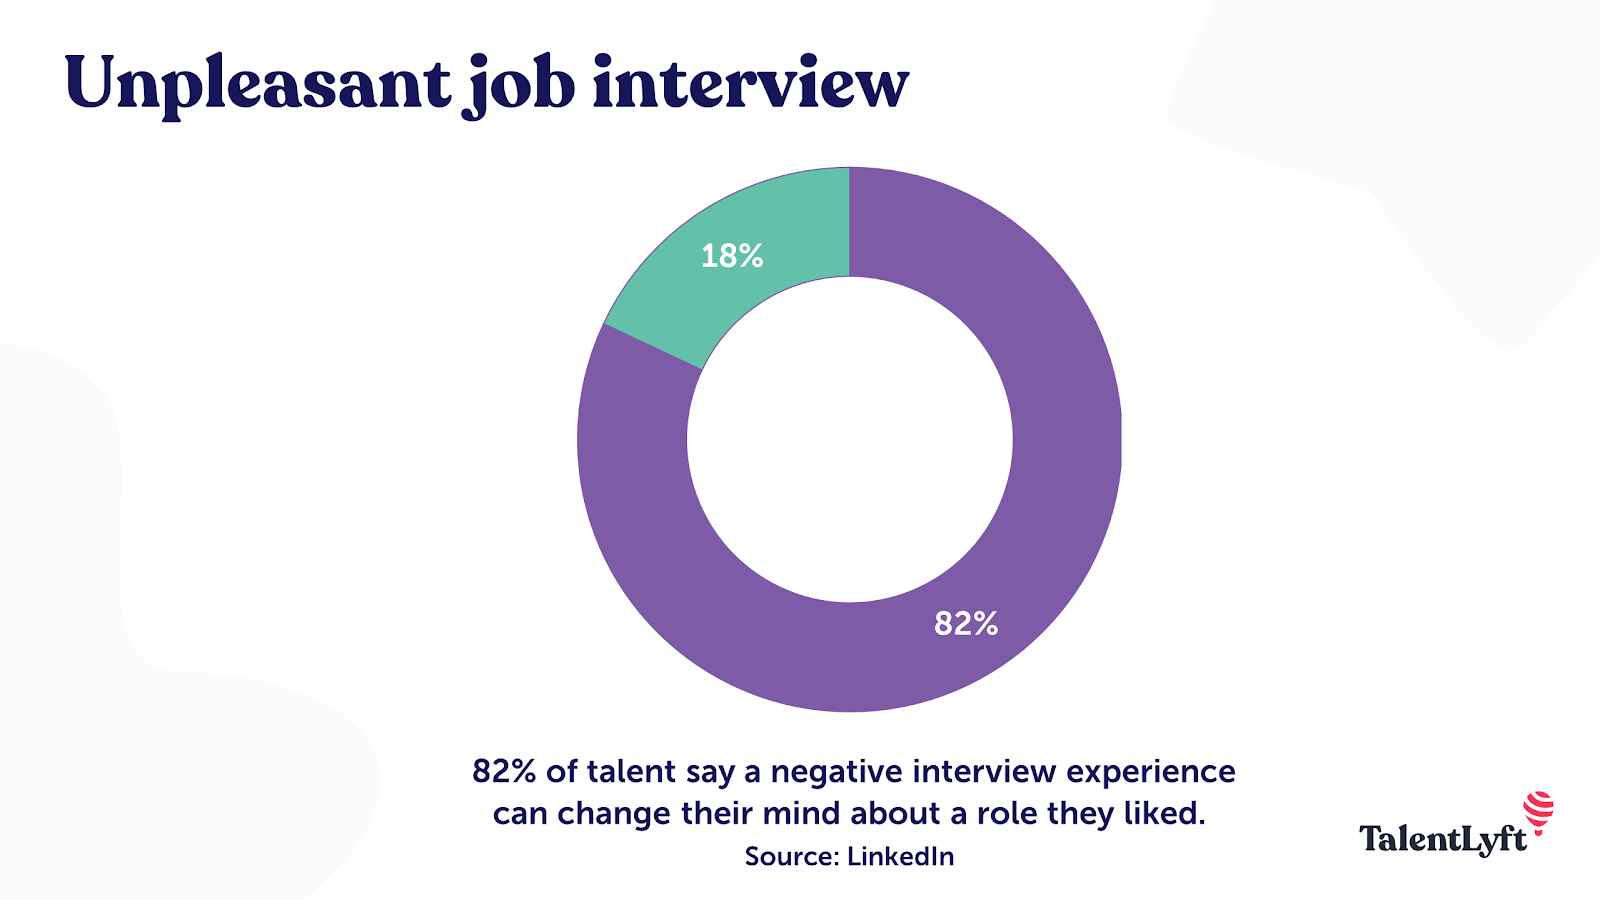 Negative interview experience